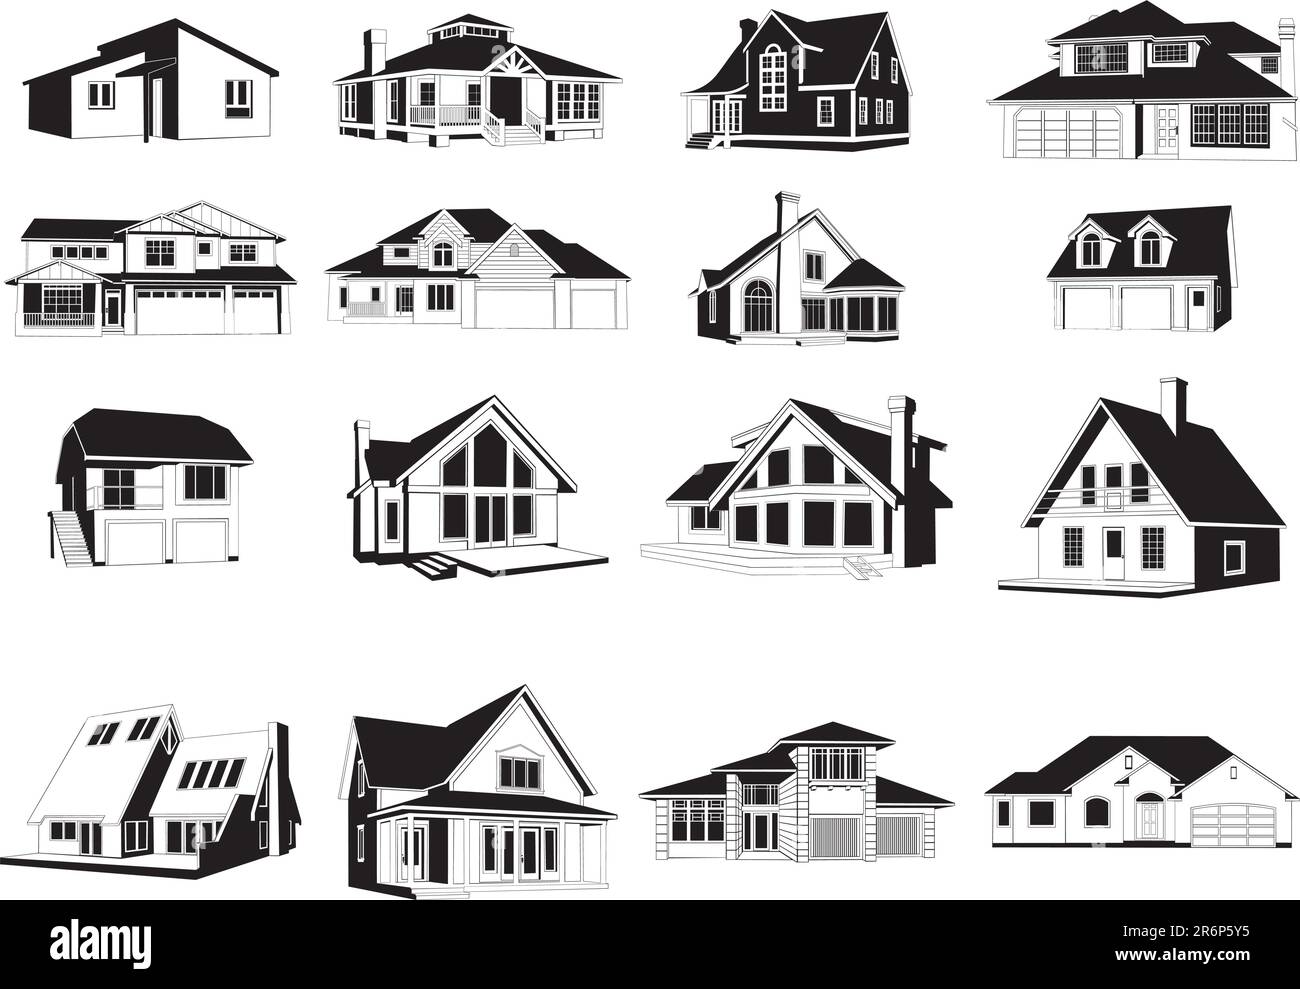 Collection of smooth vector EPS illustrations of various houses Stock ...